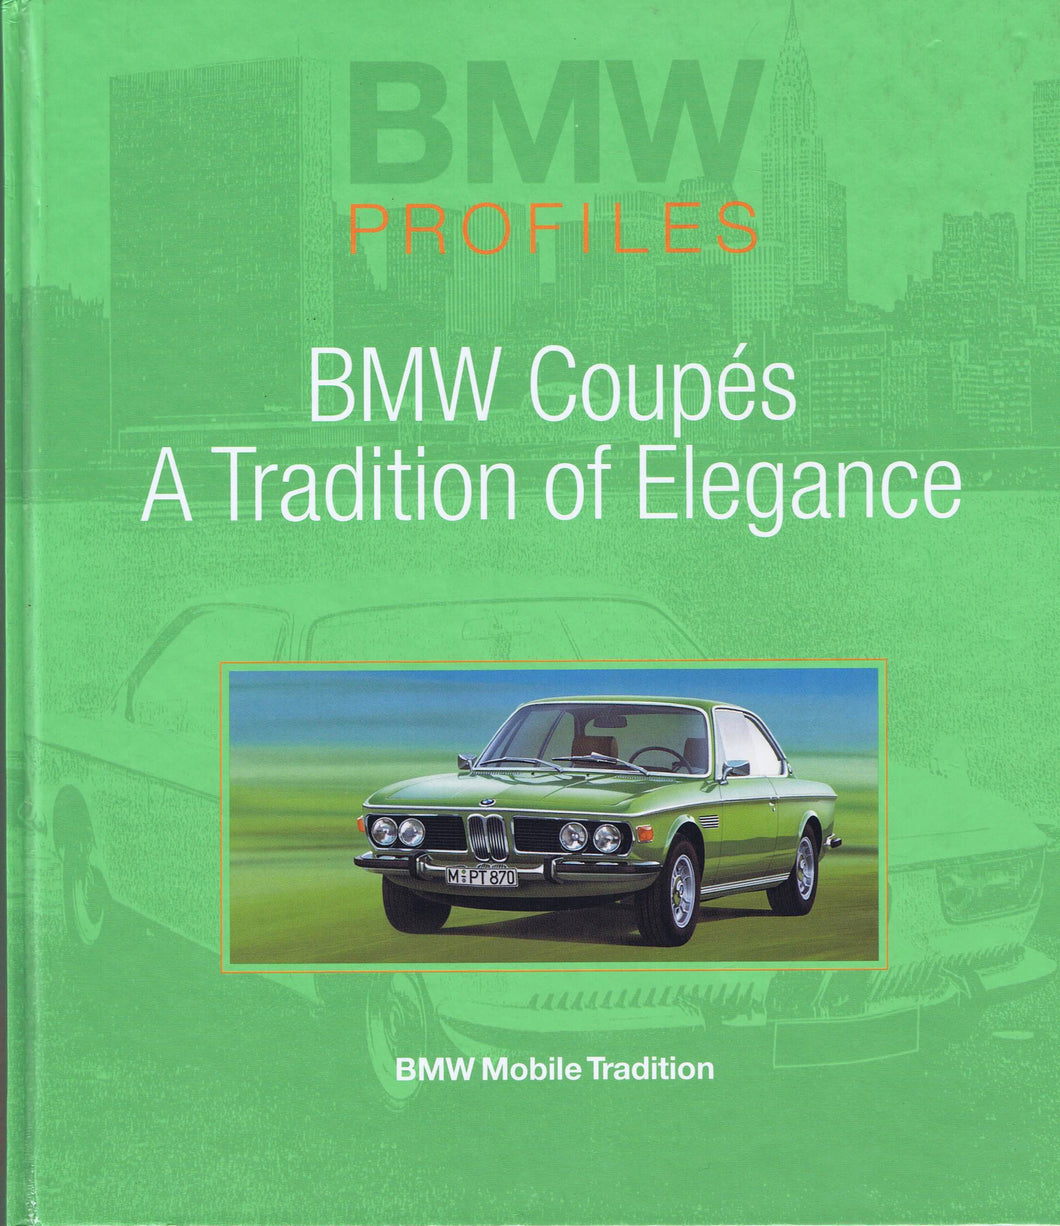 BMW Profiles - BMW Coupes A Tradition of Elegance